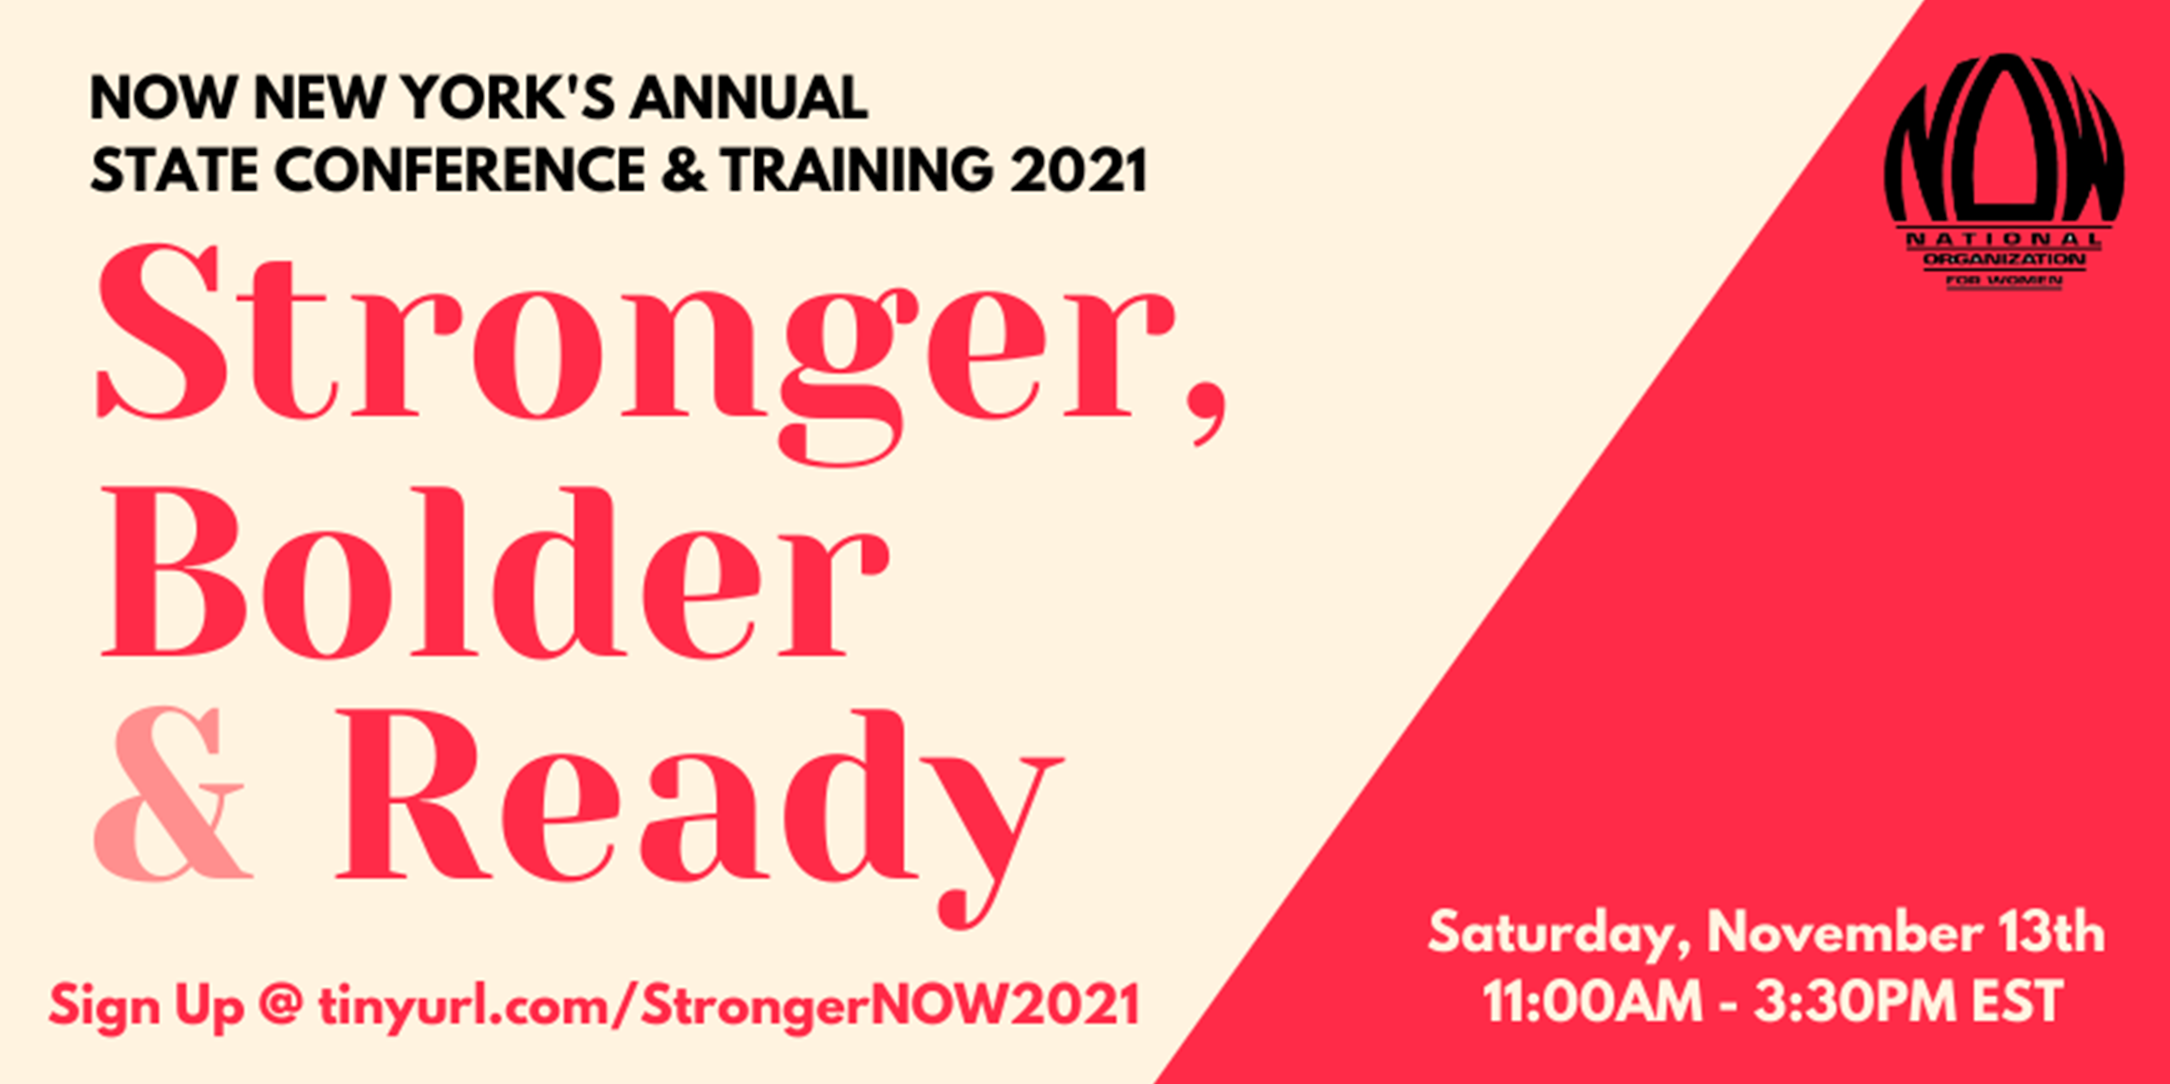 Stronger, Bolder & Ready! NOW New York's Annual State Conference